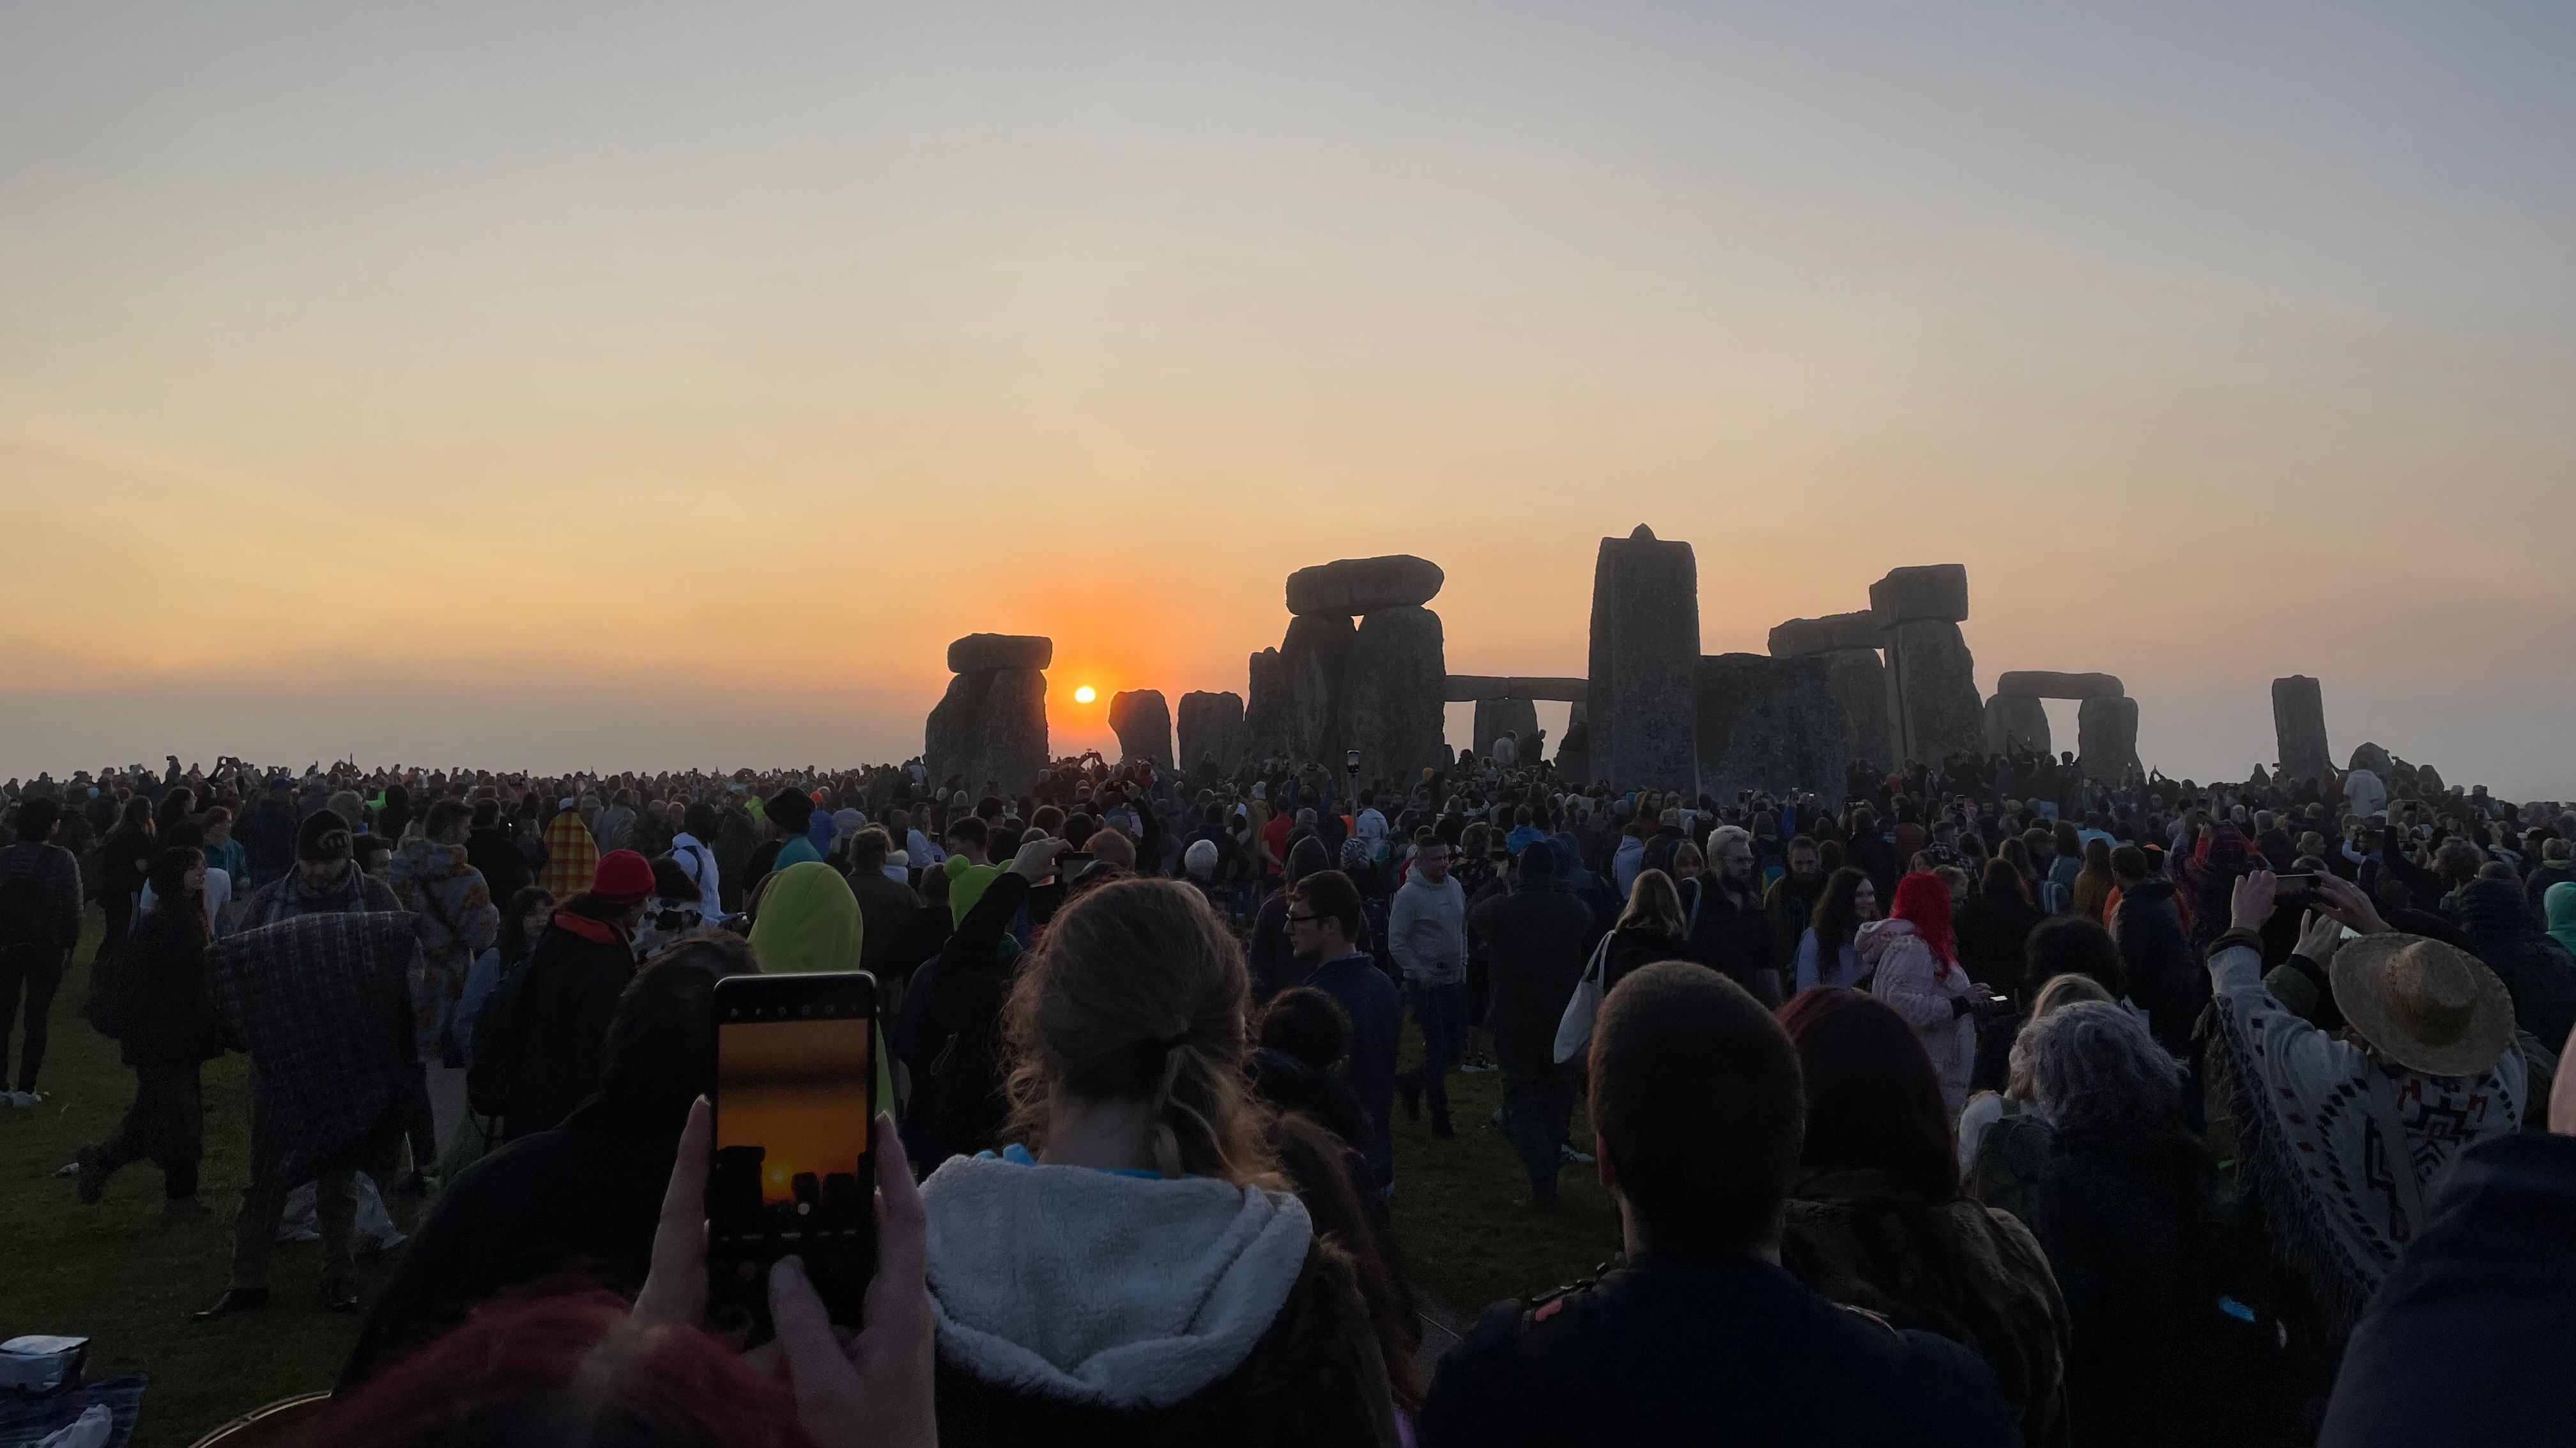 Thousands watch sun rise at Stonehenge for Summer Solstice